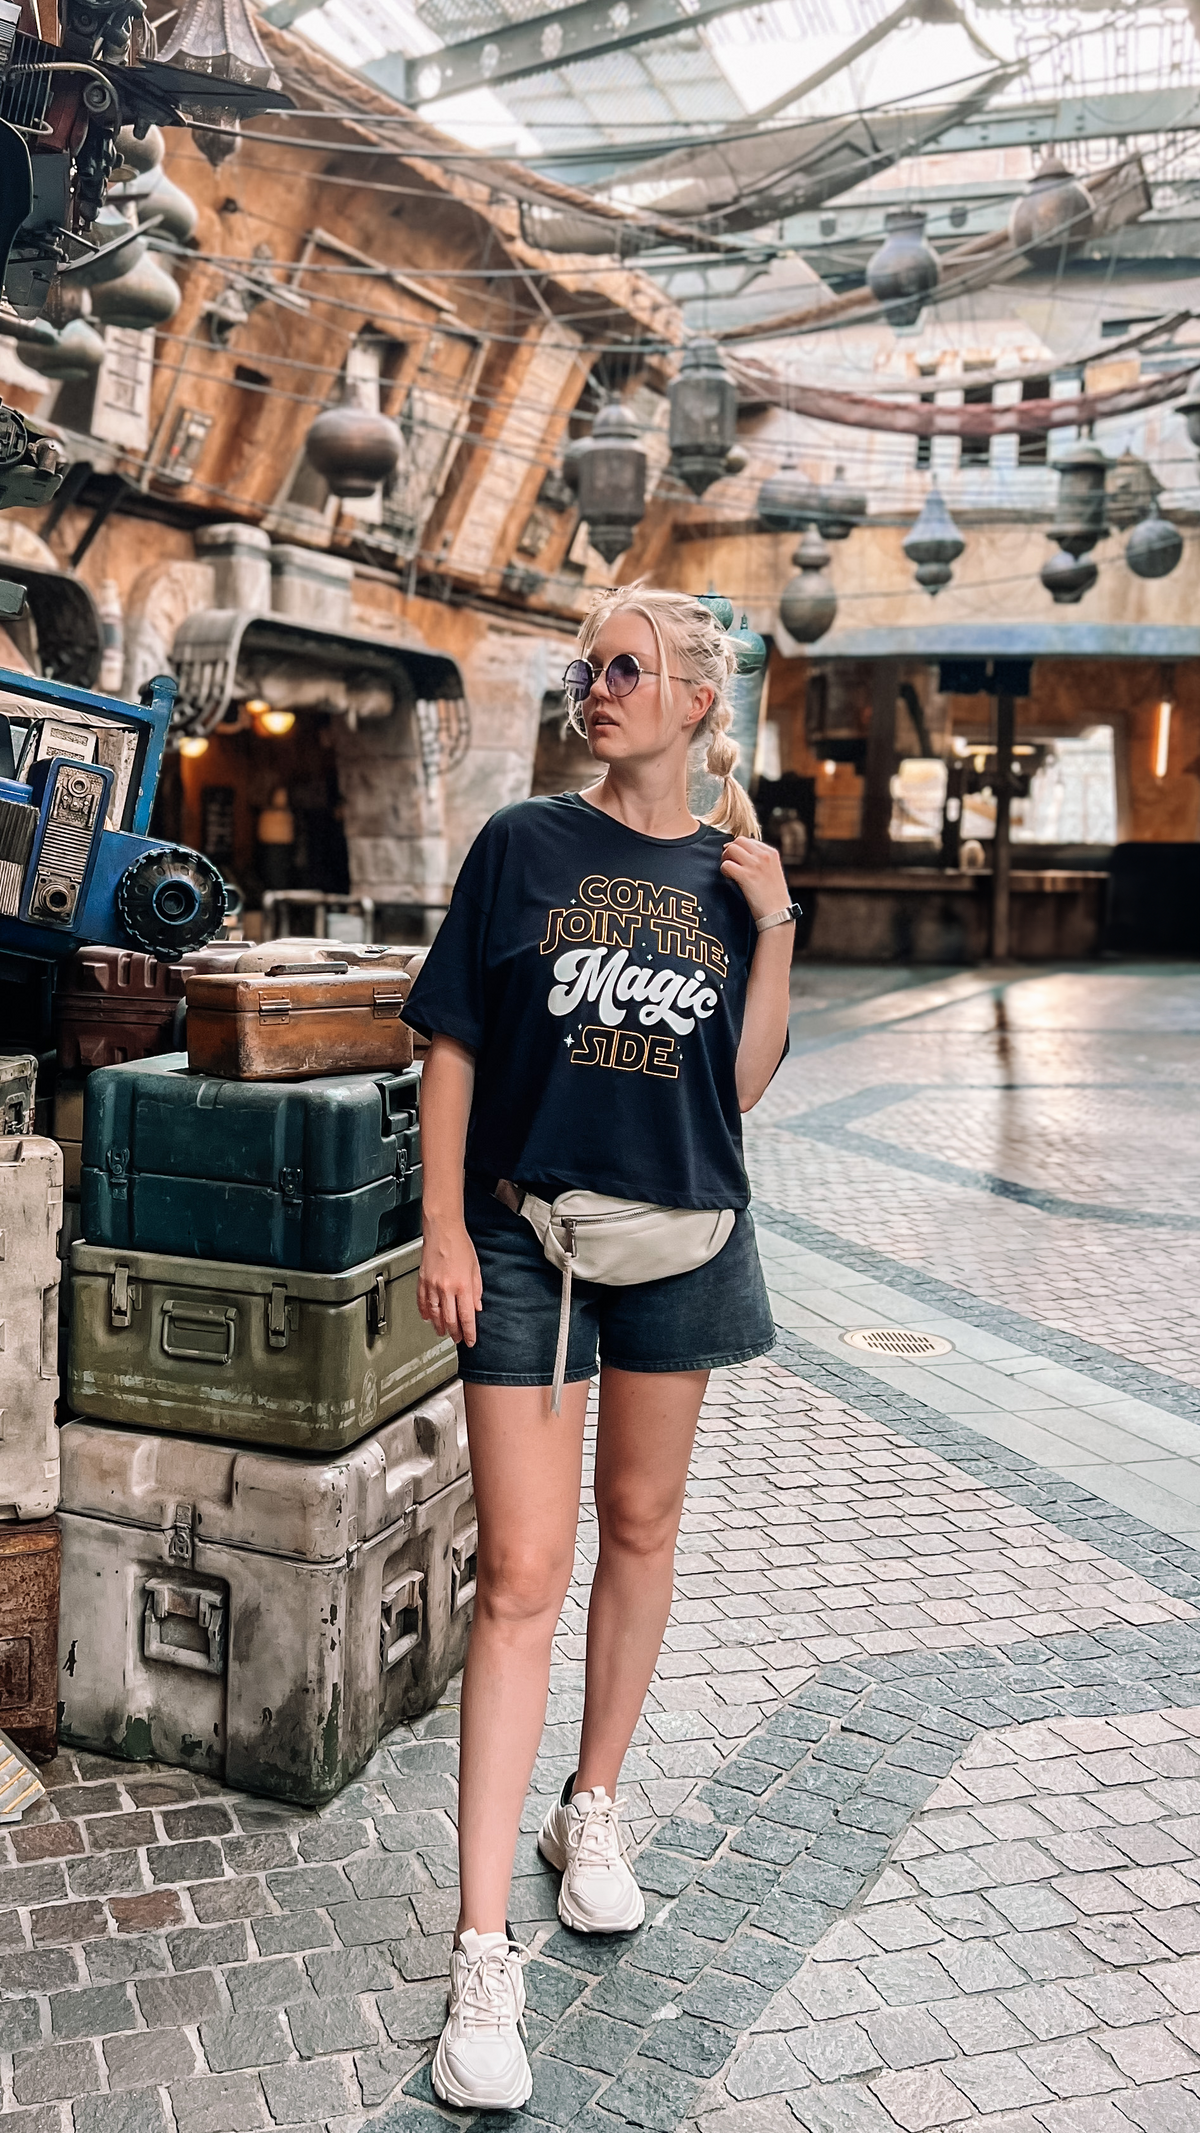 A young woman wearing a "Come Join the Magic Side" crop top stands in front of the Star Wars Trading Post at Disney World.